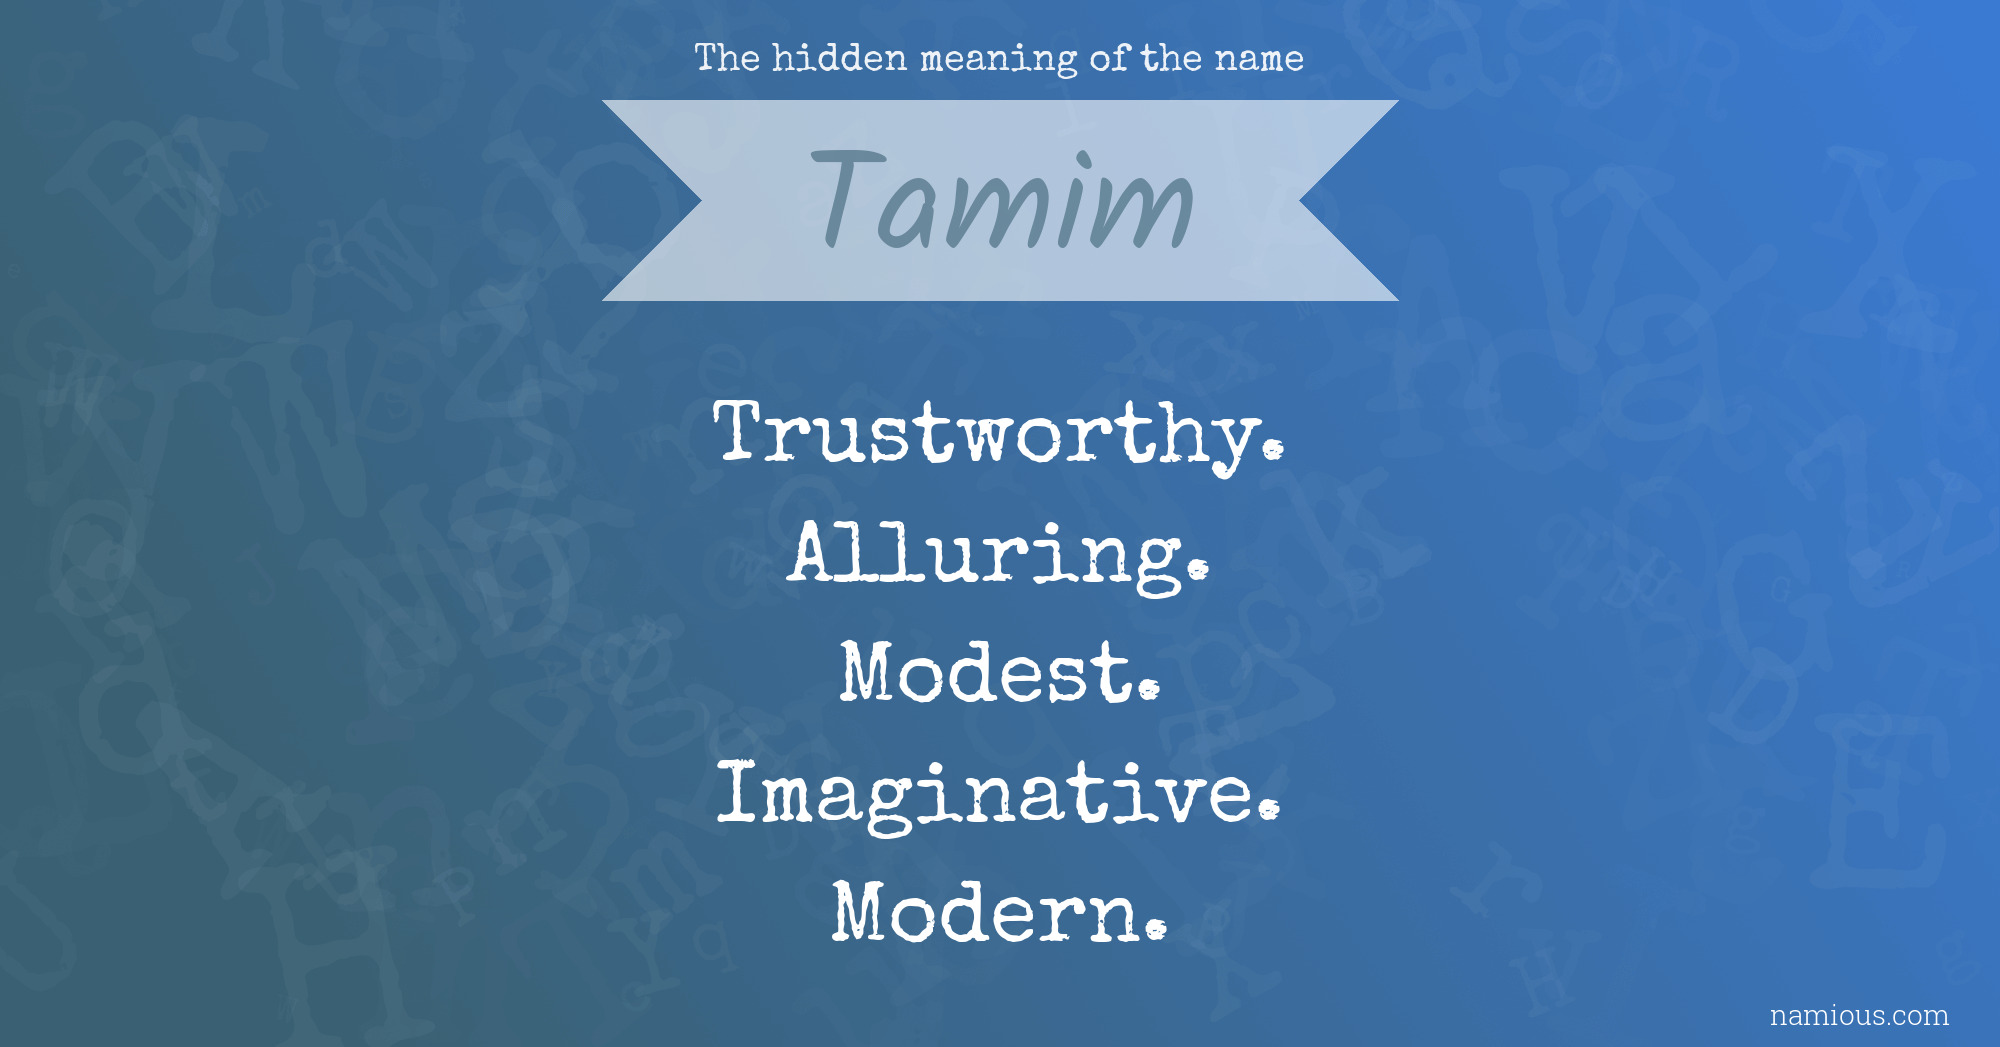 The hidden meaning of the name Tamim